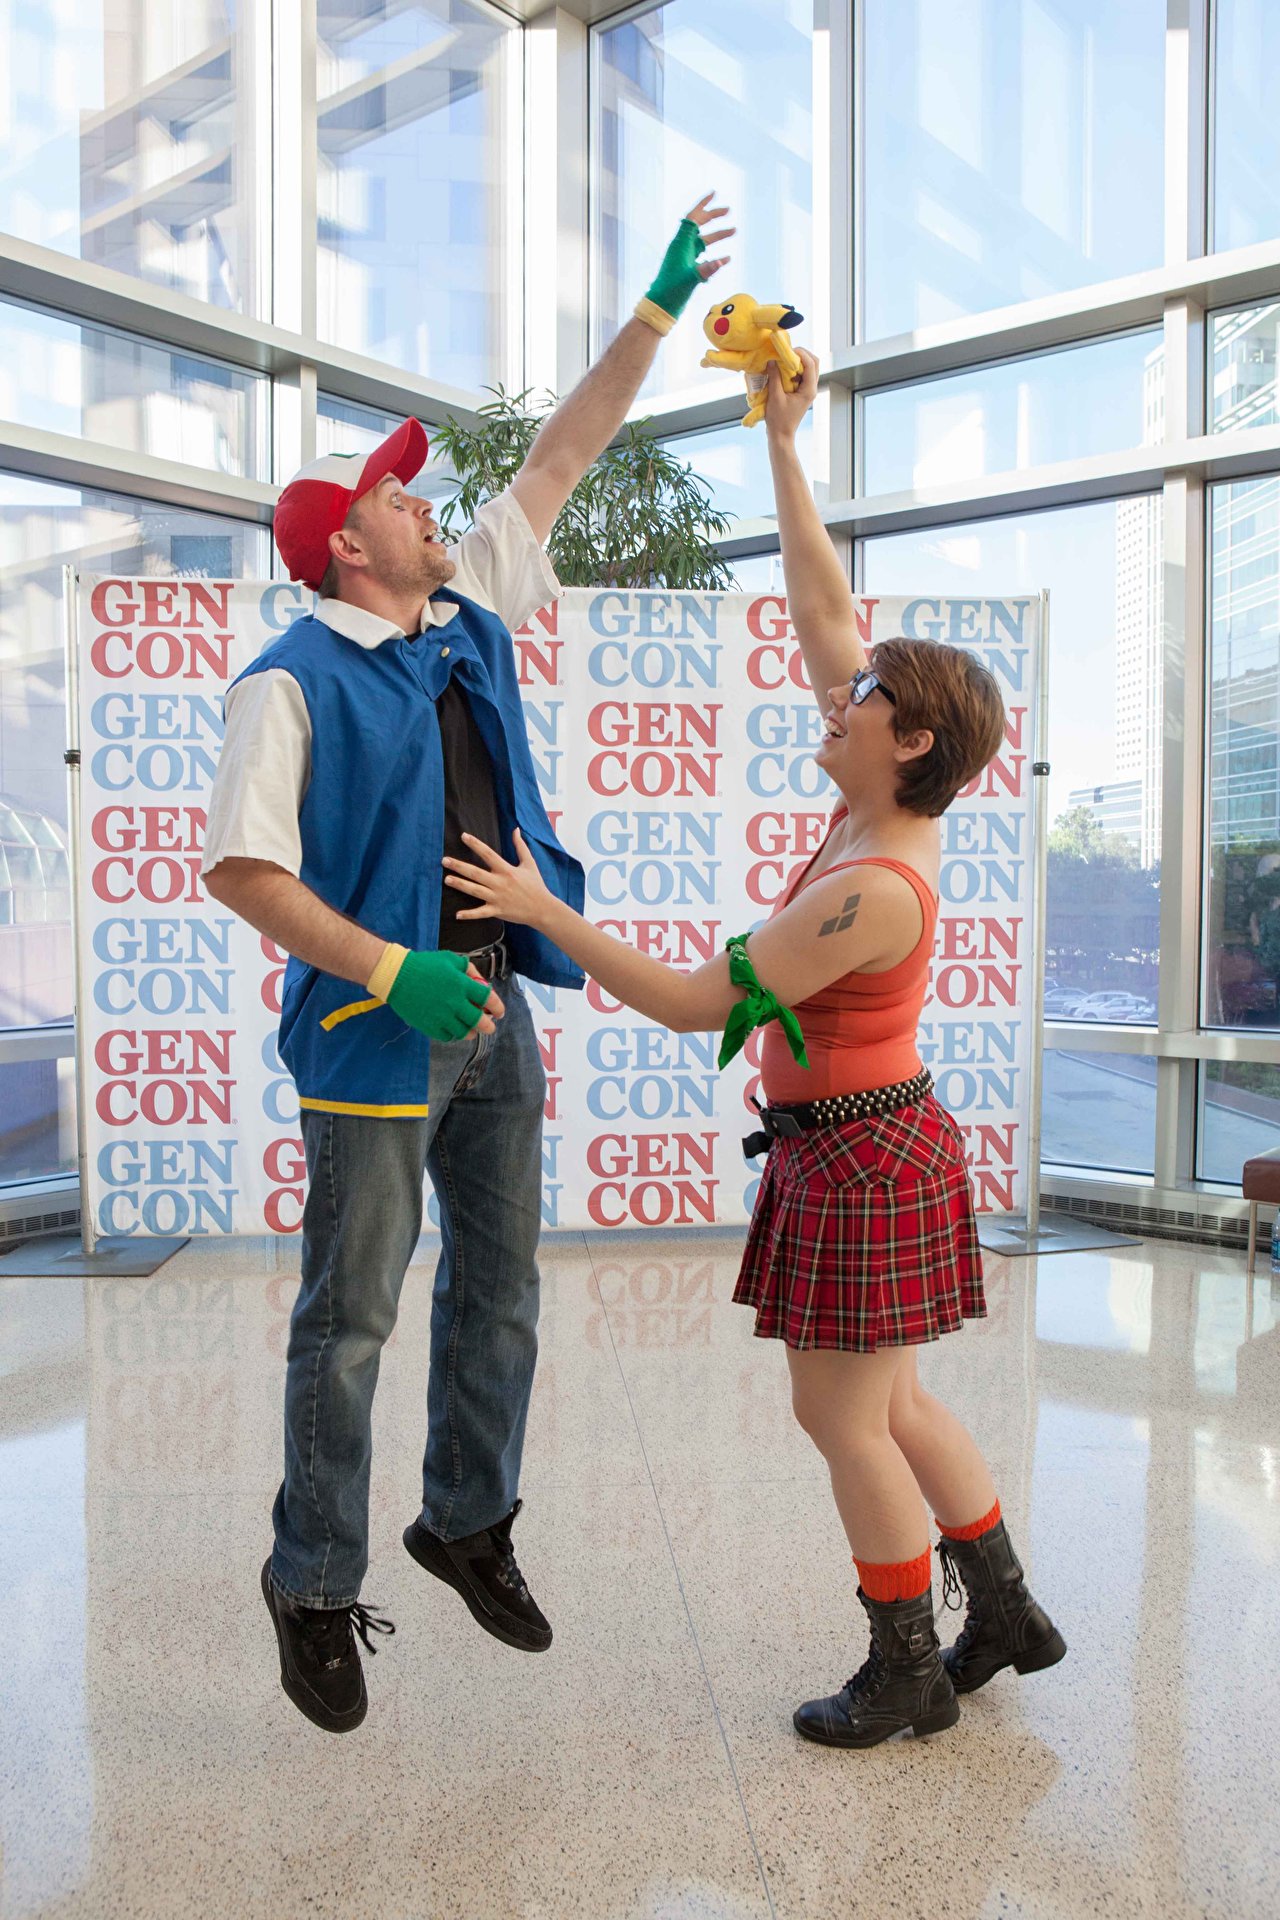 Cospix.net photo featuring Cosplay in America